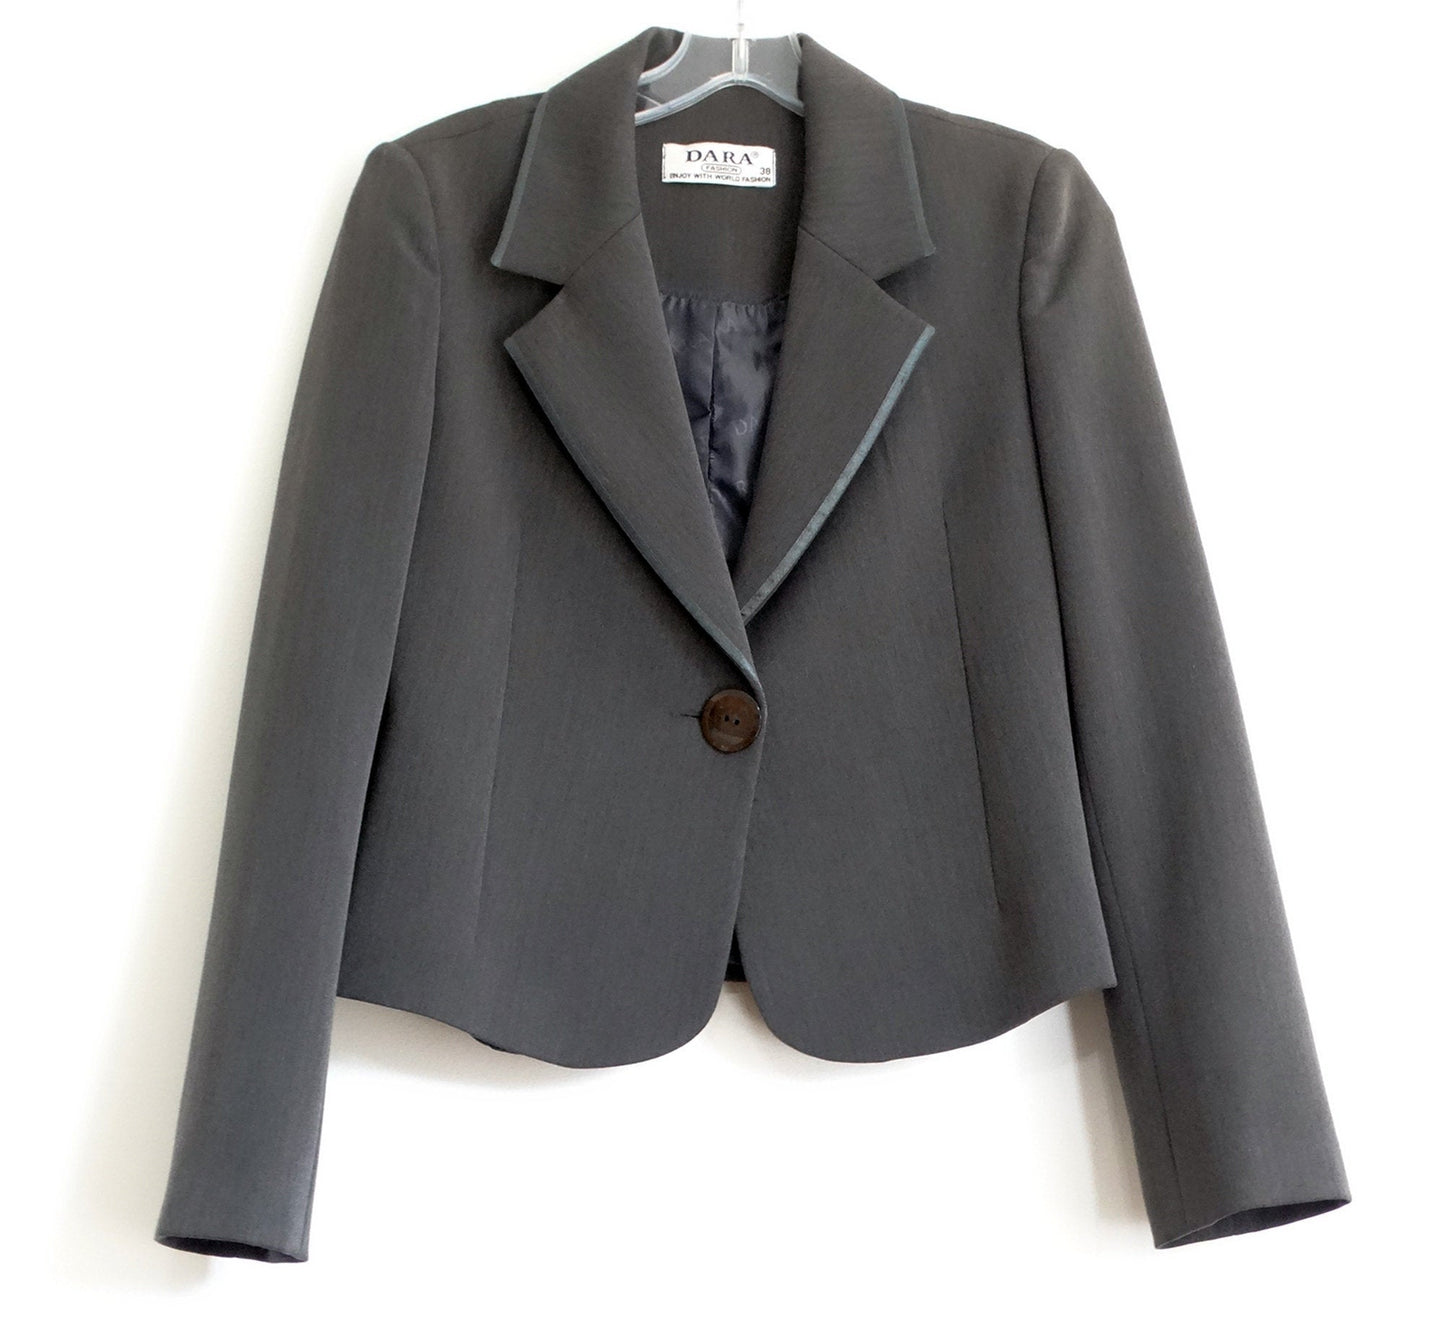 Vintage Women's Dara Fashion Gray Fitted One Button Lined Blazer Suit Jacket, size 8, Career Work Jacket, Made in Turkey, Polyester Blend.-Shop-eBargainsAndDeals.com.